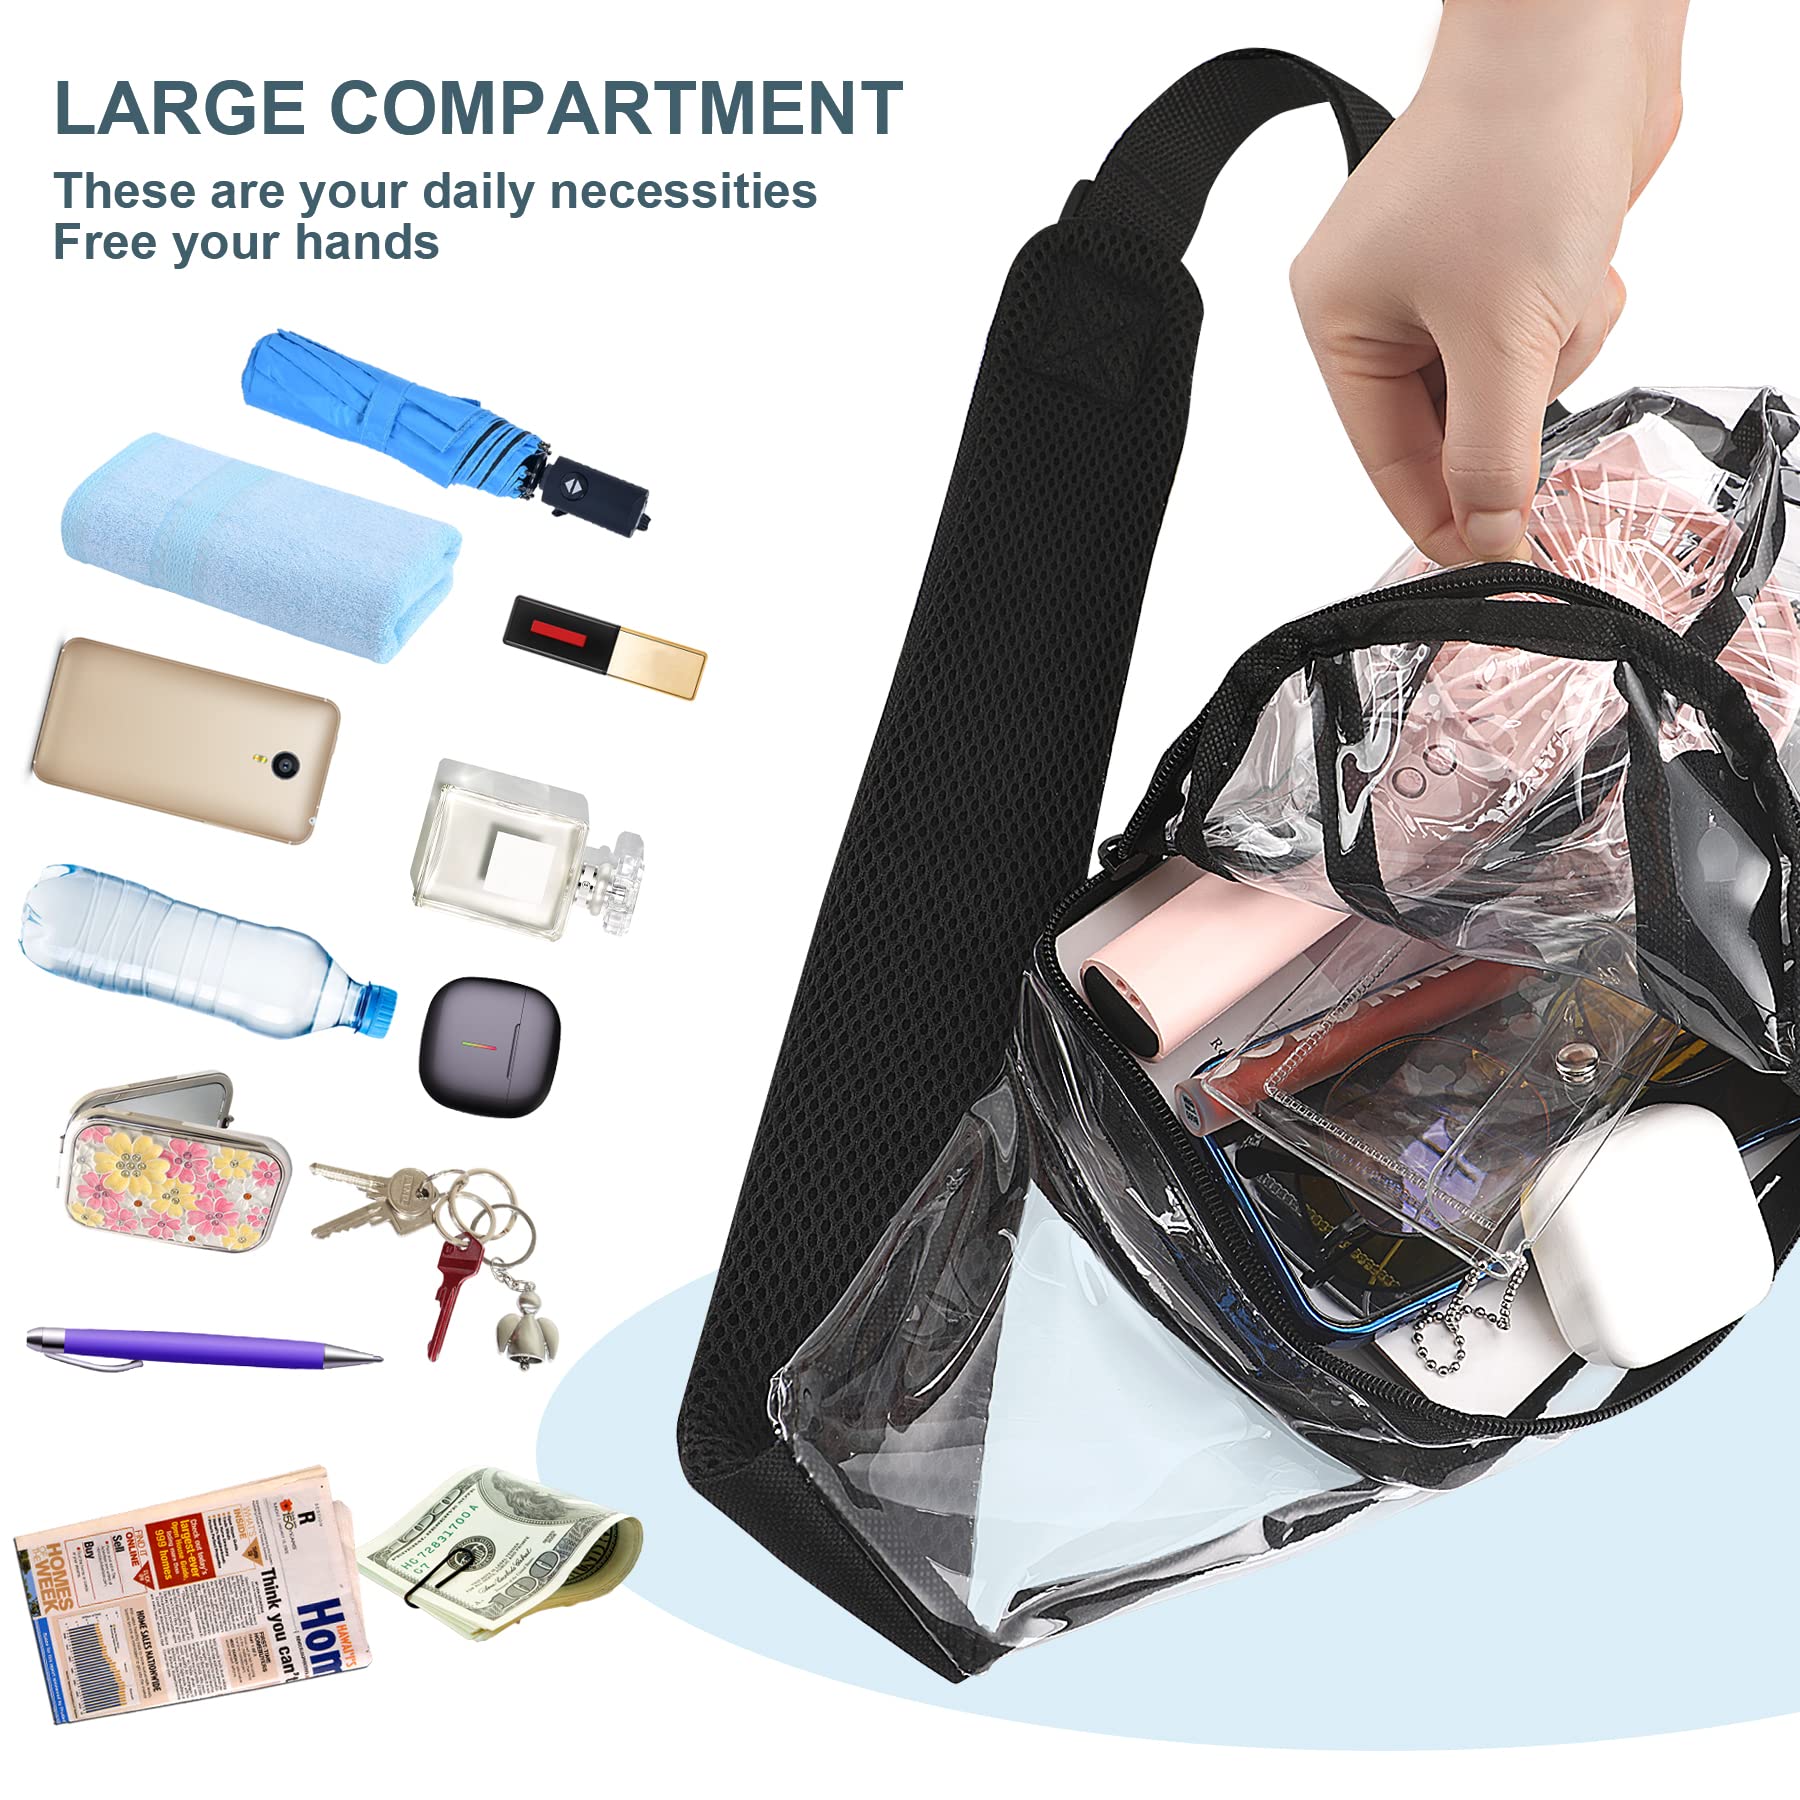 JULMELON Clear Sling Bag, Clear PVC Crossbody Chest Bag Stadium Approved, Backpack with Adjustable Strap for Men Women Hiking, Stadium or Concerts